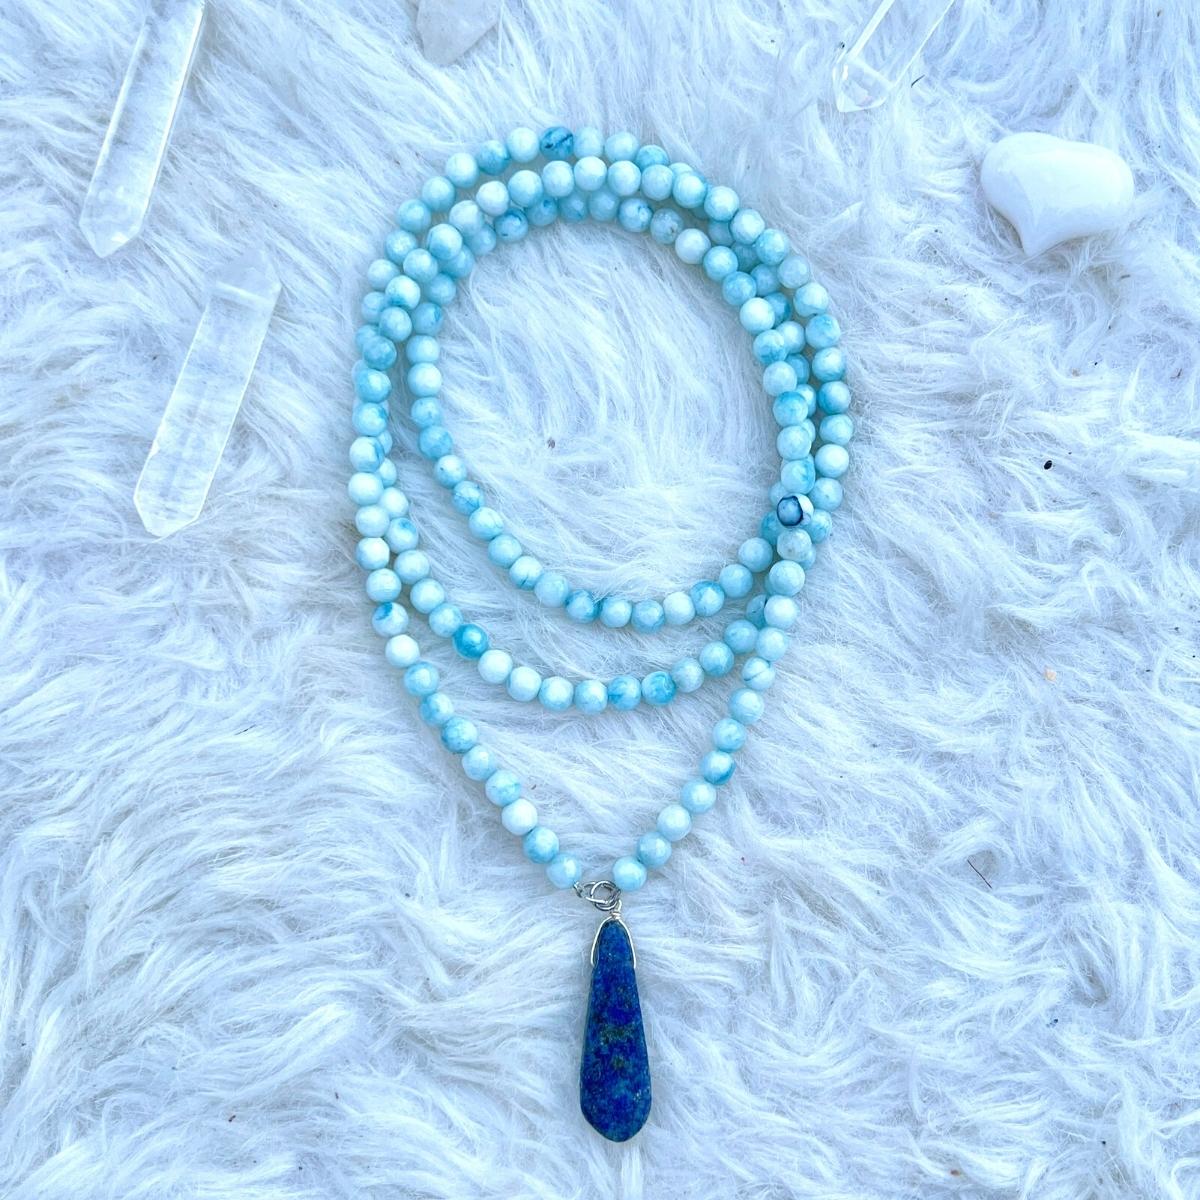 This Truthful and Wise Necklace with Light Blue Agate and Lapis supports change that comes from within. 